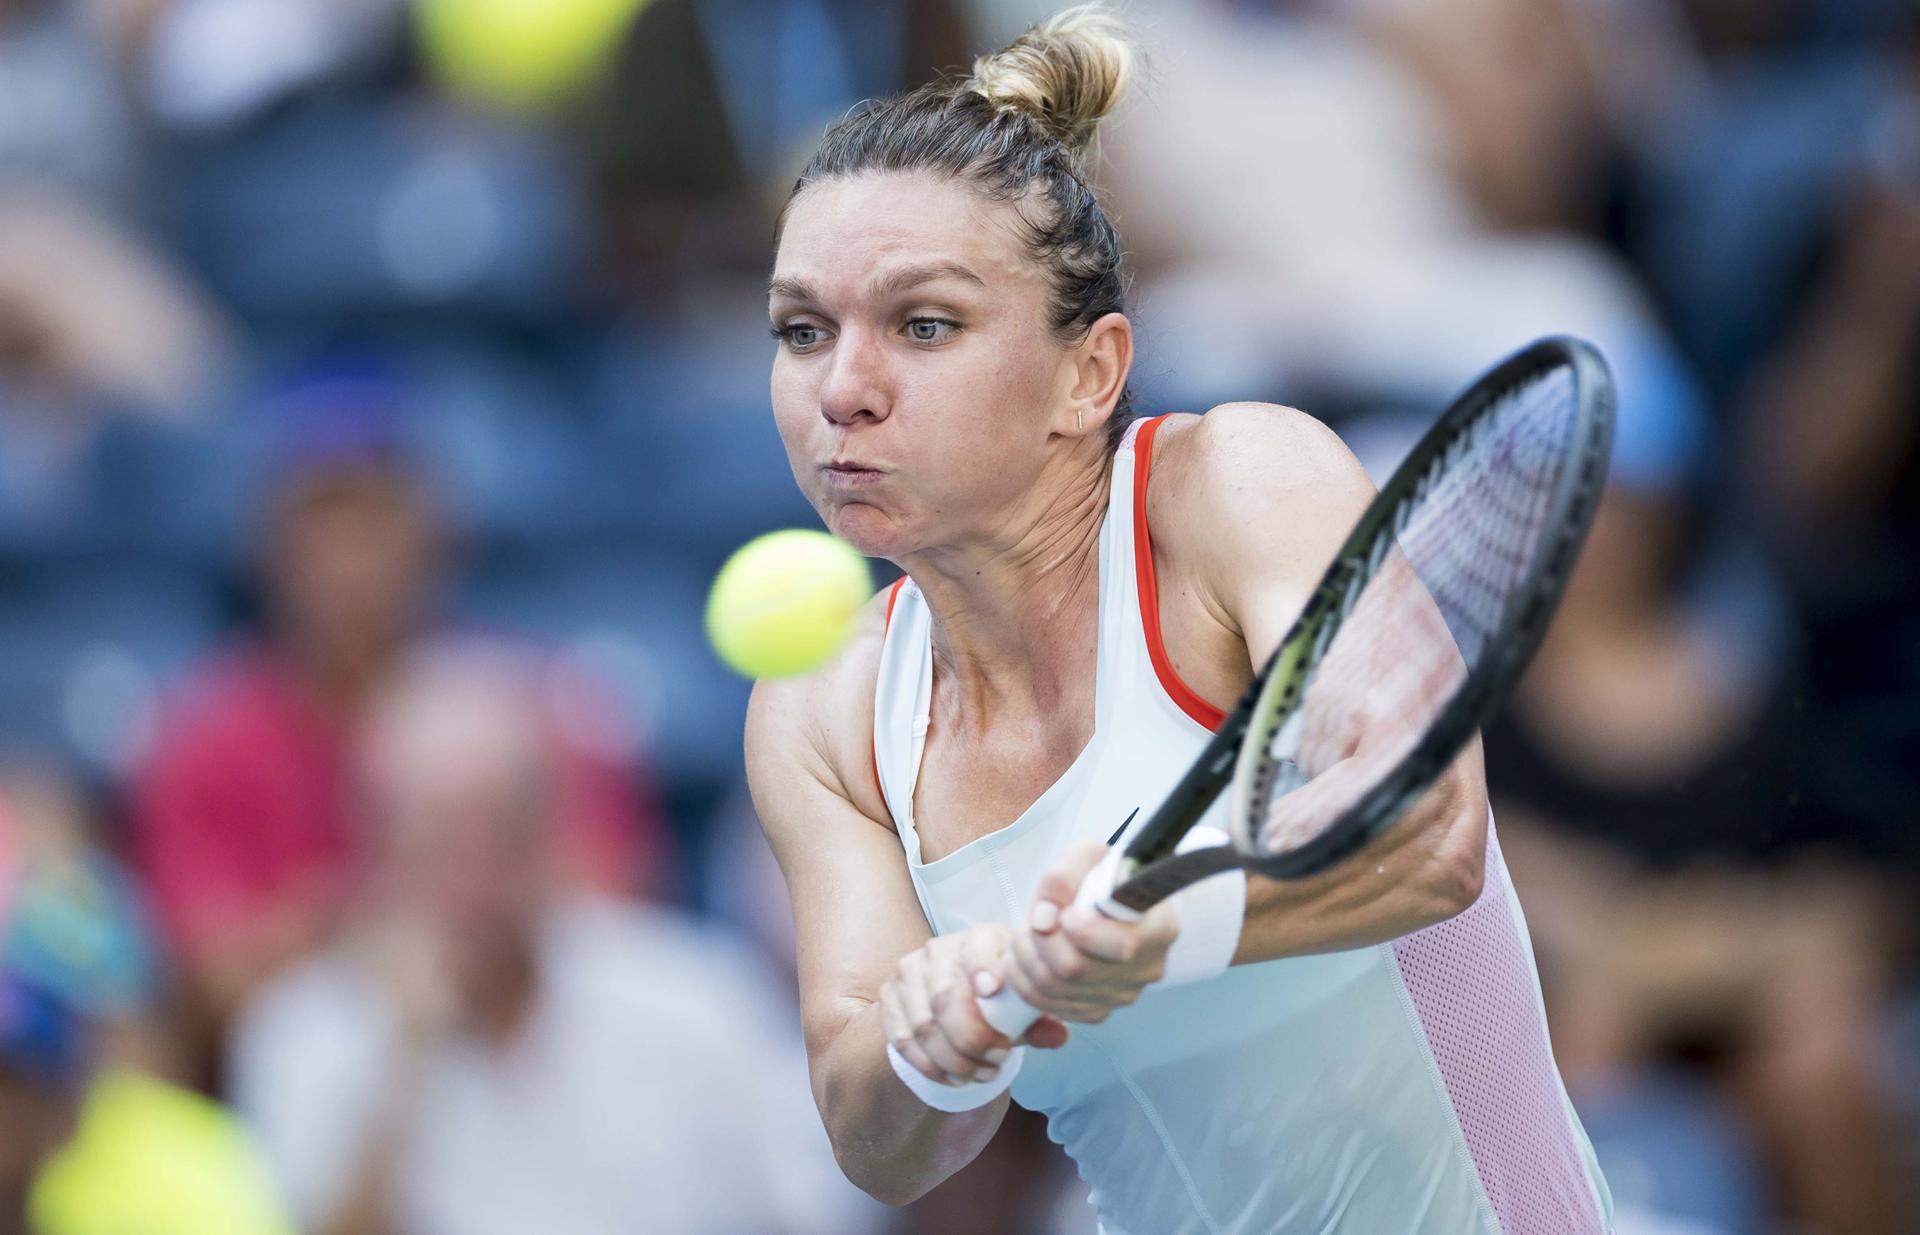 (FILE) - Simona Halep of Romania hits a return to Daria Snigur of Ukraine during their first round match at the US Open Tennis Championships at the USTA National Tennis Center in the Flushing Meadows, New York, USA, 29 August 2022 (reissued 21 October 2022). (Tenis, Abierto, Rumanía, Ucrania, Estados Unidos, Nueva York) EFE/EPA/JUSTIN LANE *** Local Caption *** 57888350
